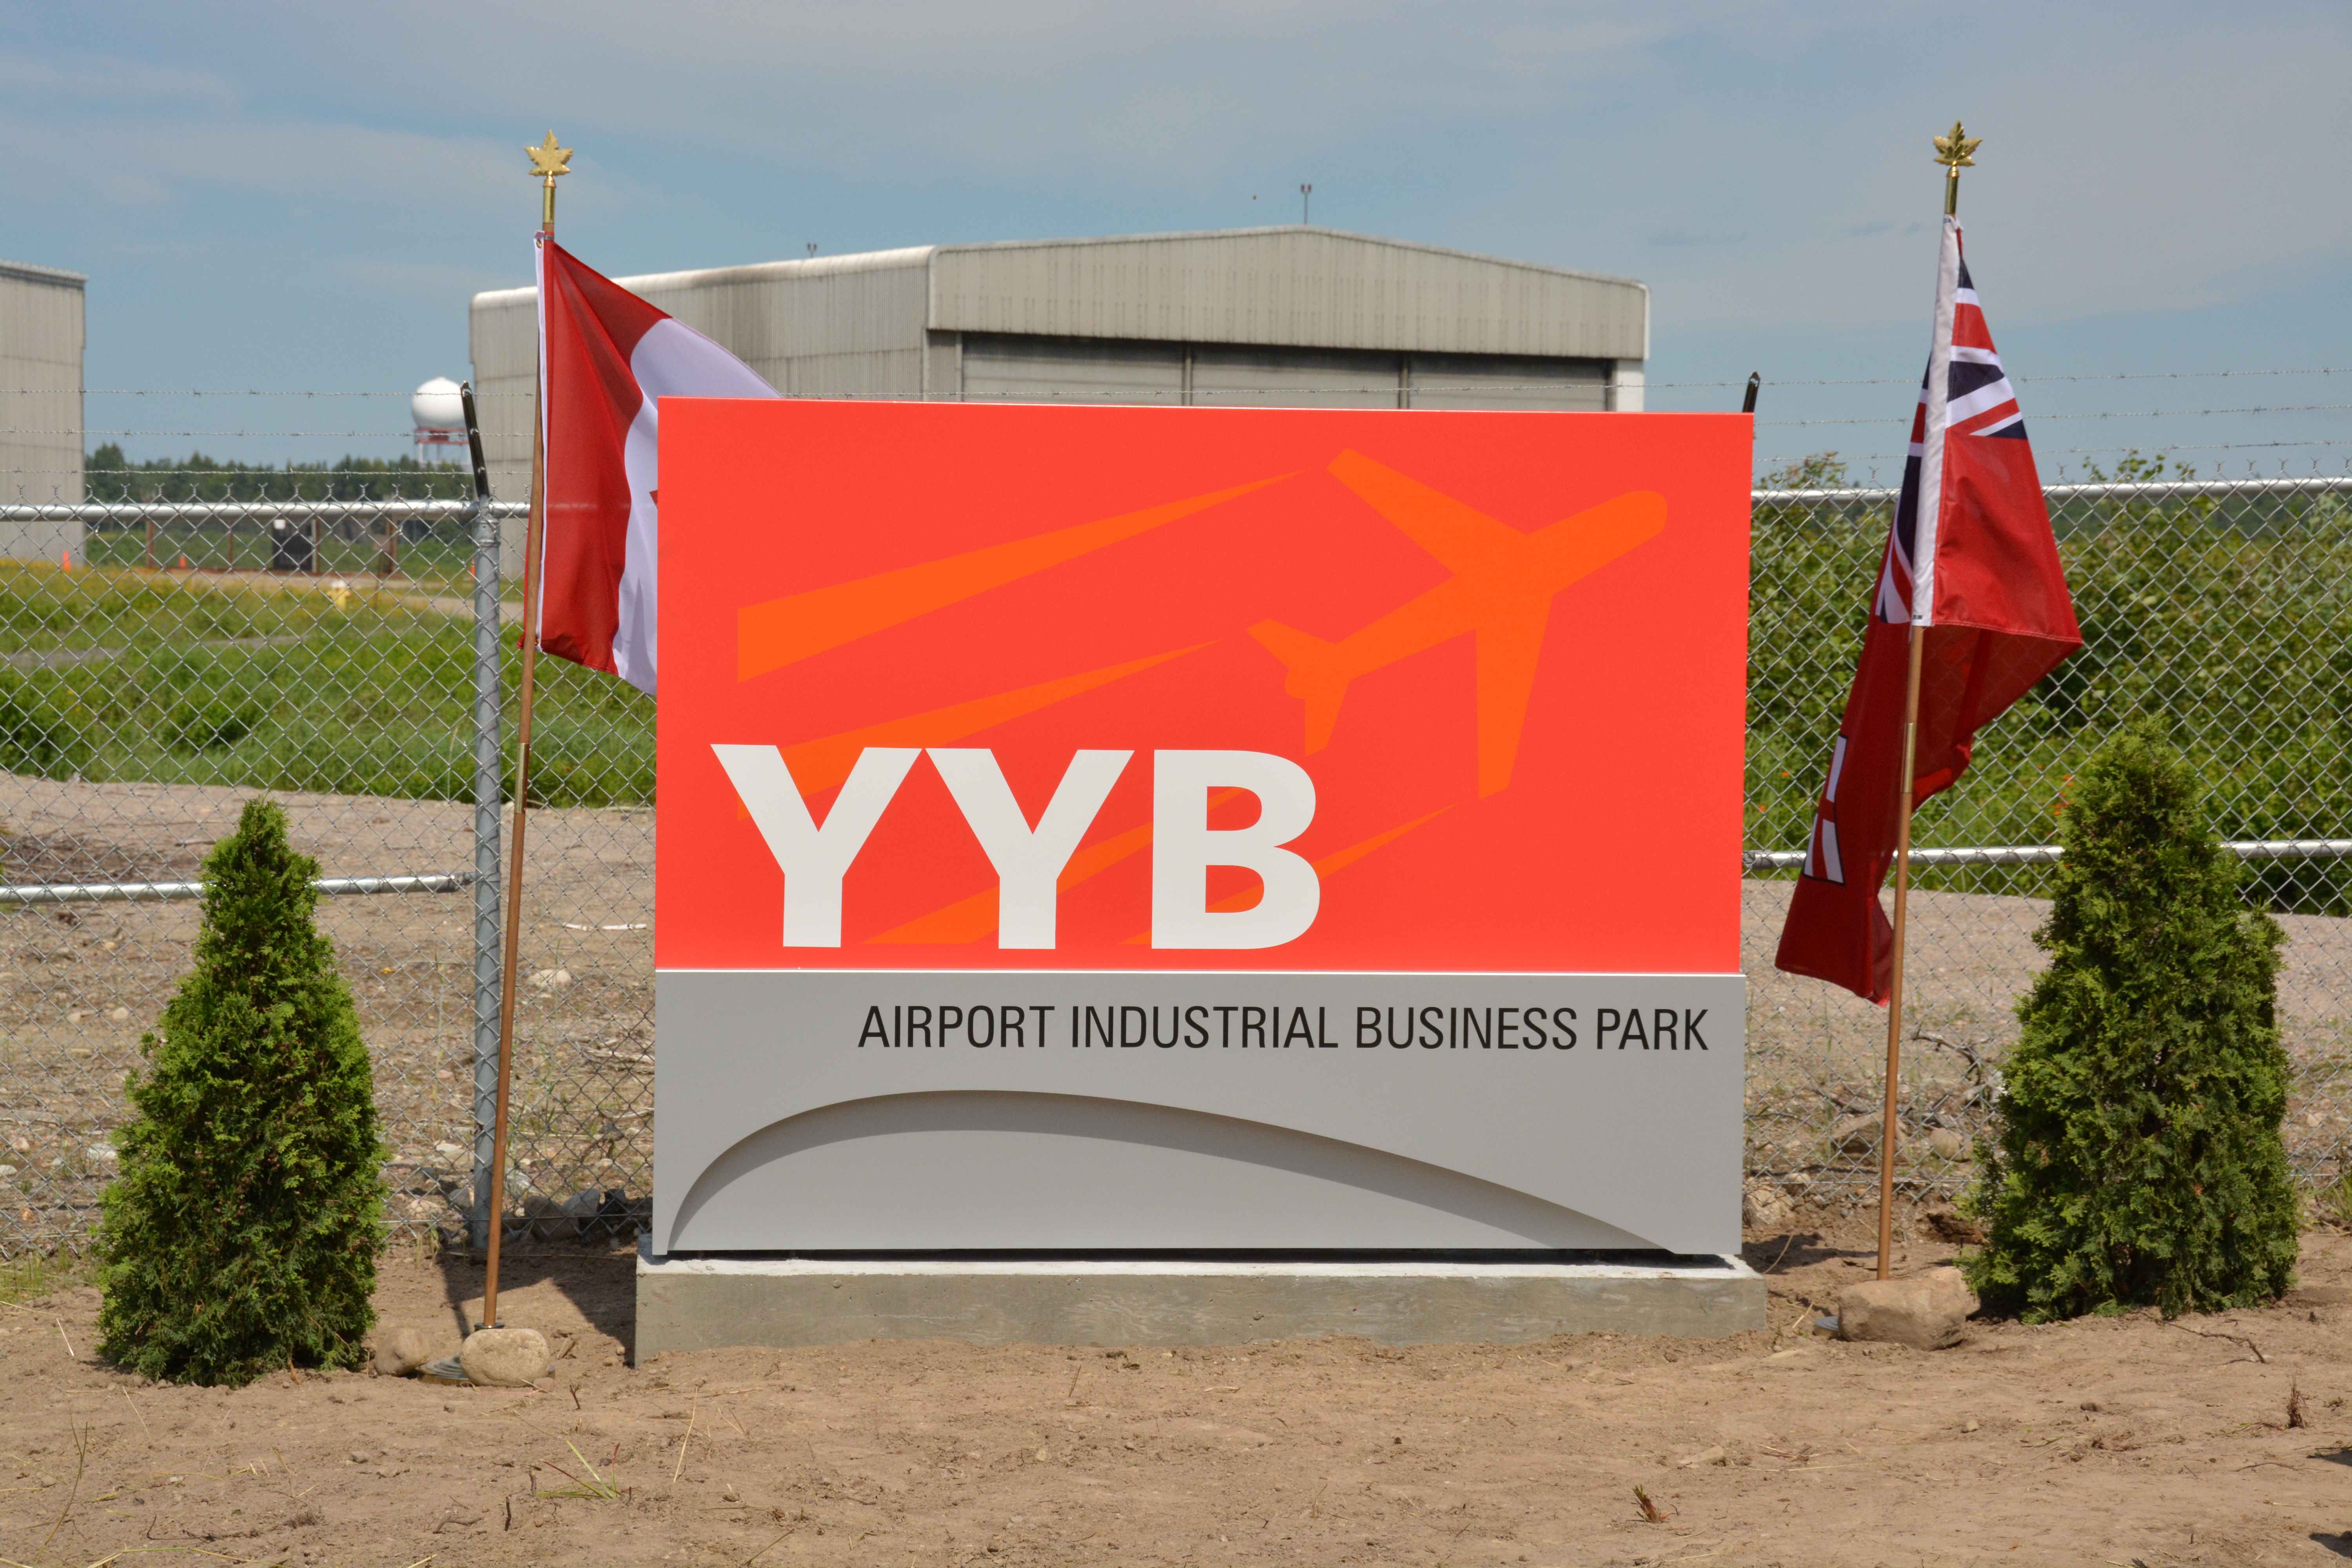 Sign for Airport Industrial Business Park